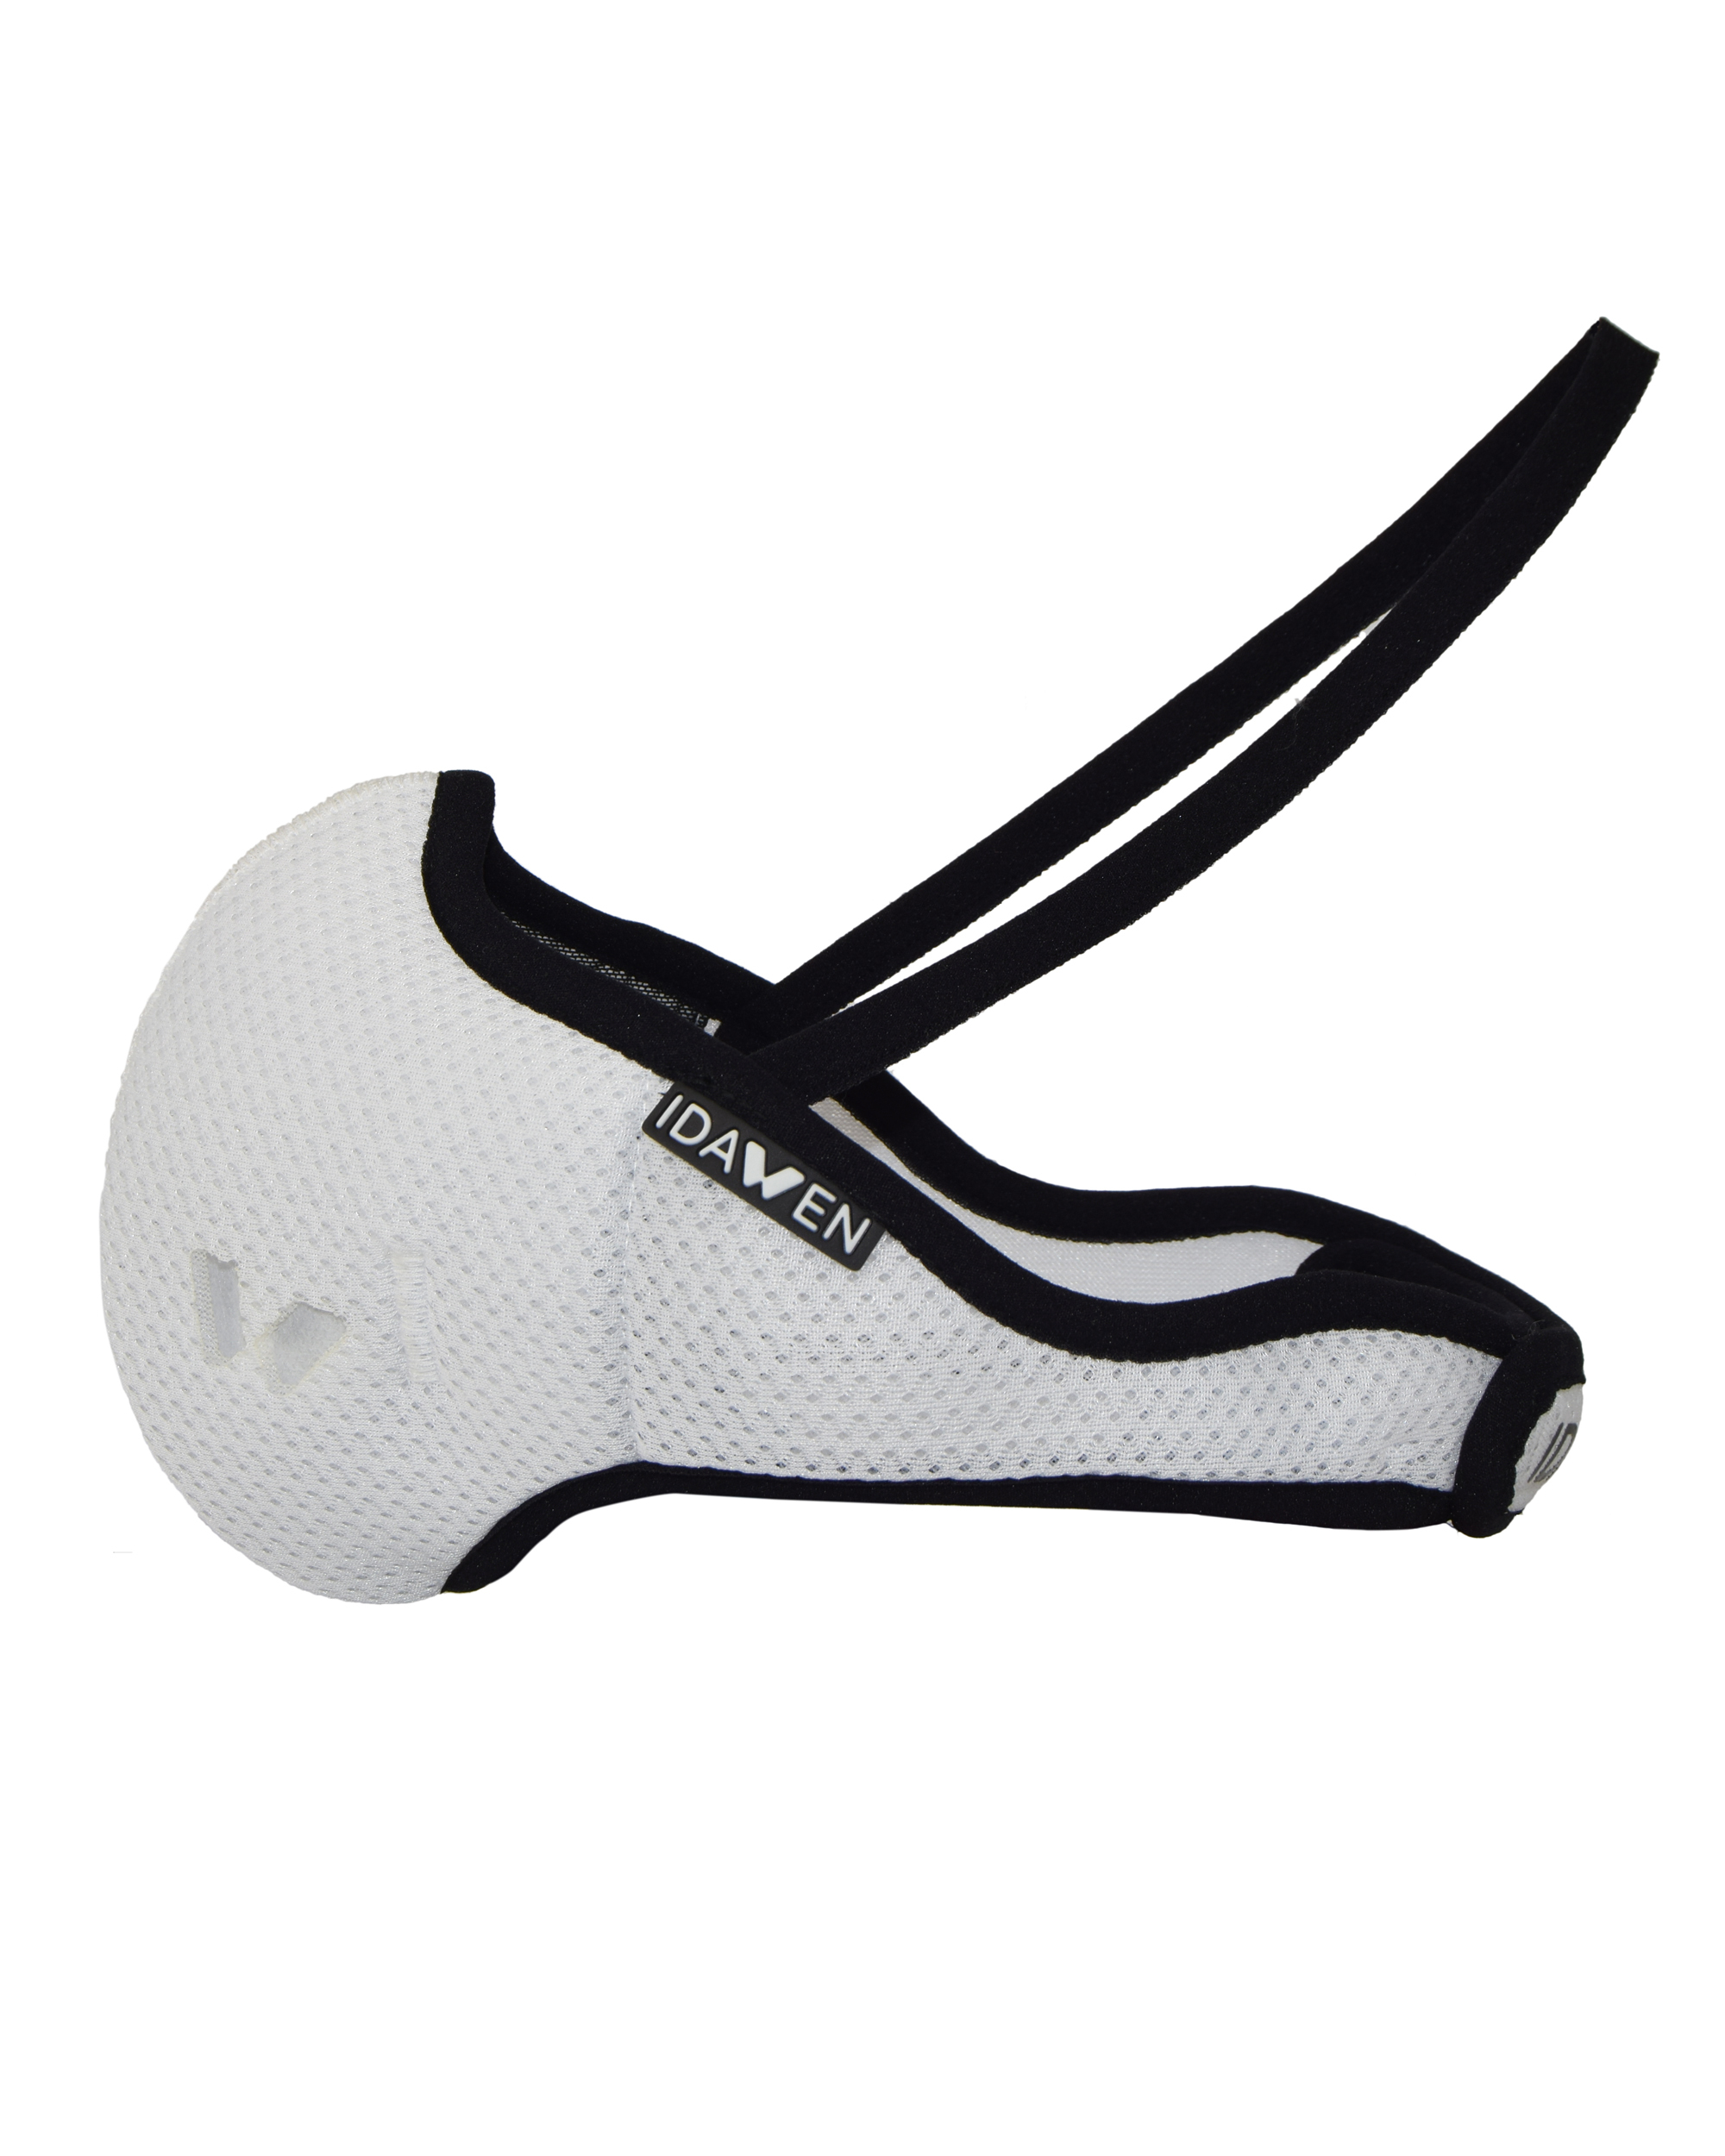 PACK SUEDE + SPORTS MASK WITH VIRICIDE FILTER PROVEIL-CSIC WHITE